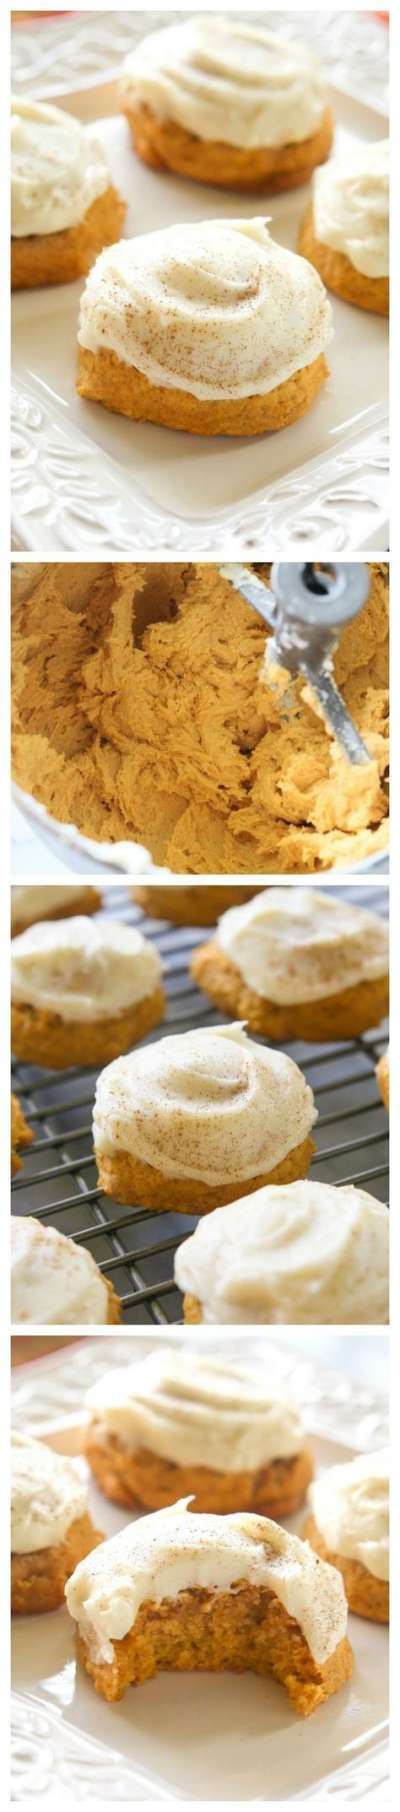 Pumpkin Cookies With Cream Cheese Frosting
 Pumpkin Spice Cookies with Maple Cream Cheese Frosting